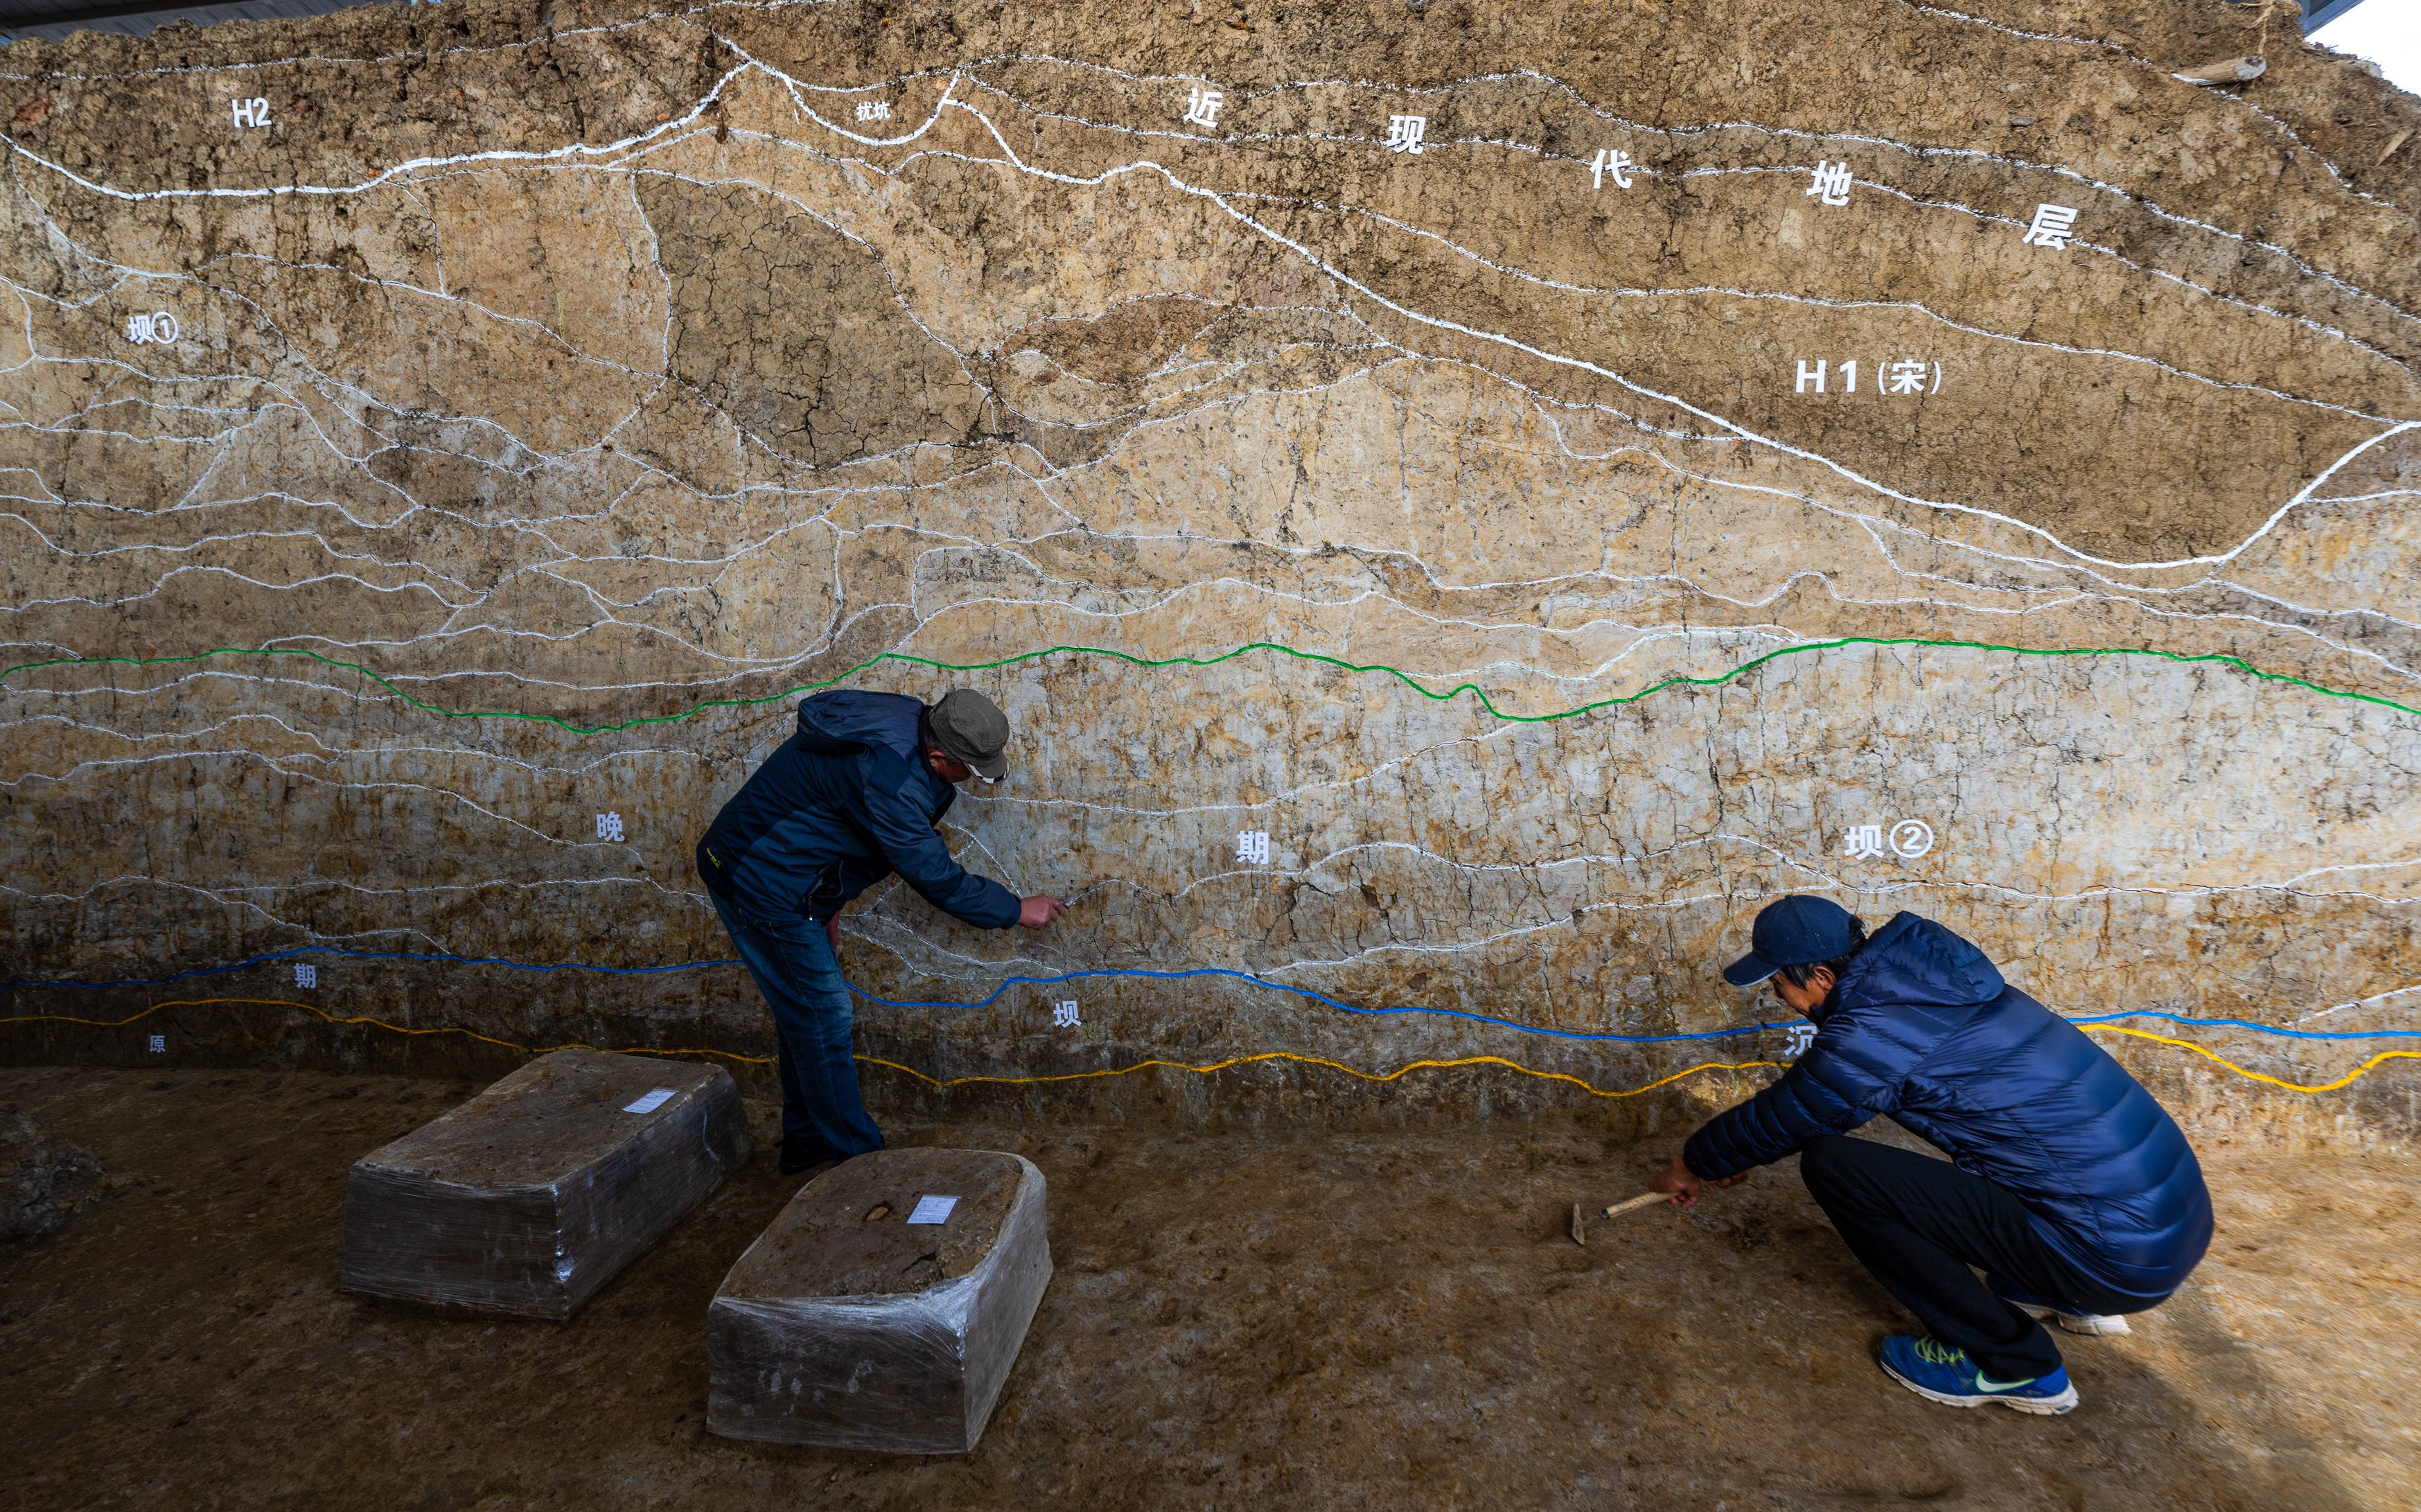 Archeologists at the relics site of the Xiongjialing Dam in Jingmen, Hubei province. The ancient dam was built around 5,100 years ago. Photo: Xinhua